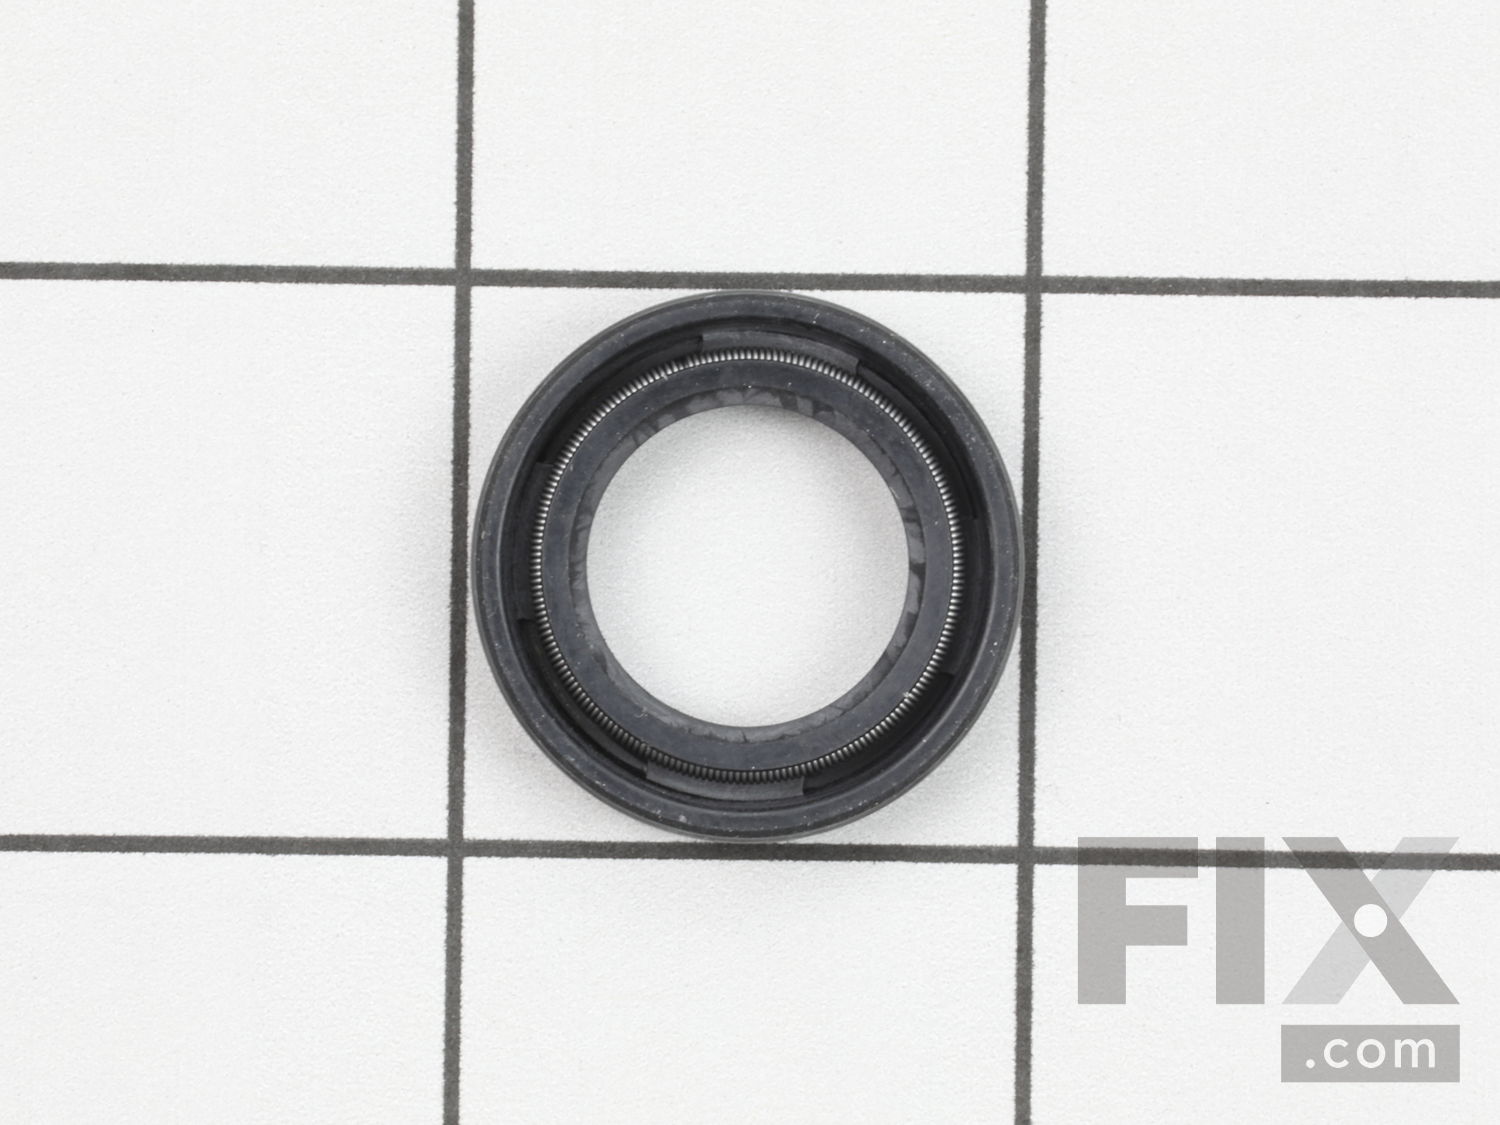 OEM Craftsman Pressure Washer Oil Seal [93680GS] | Ships Today | Fix.com